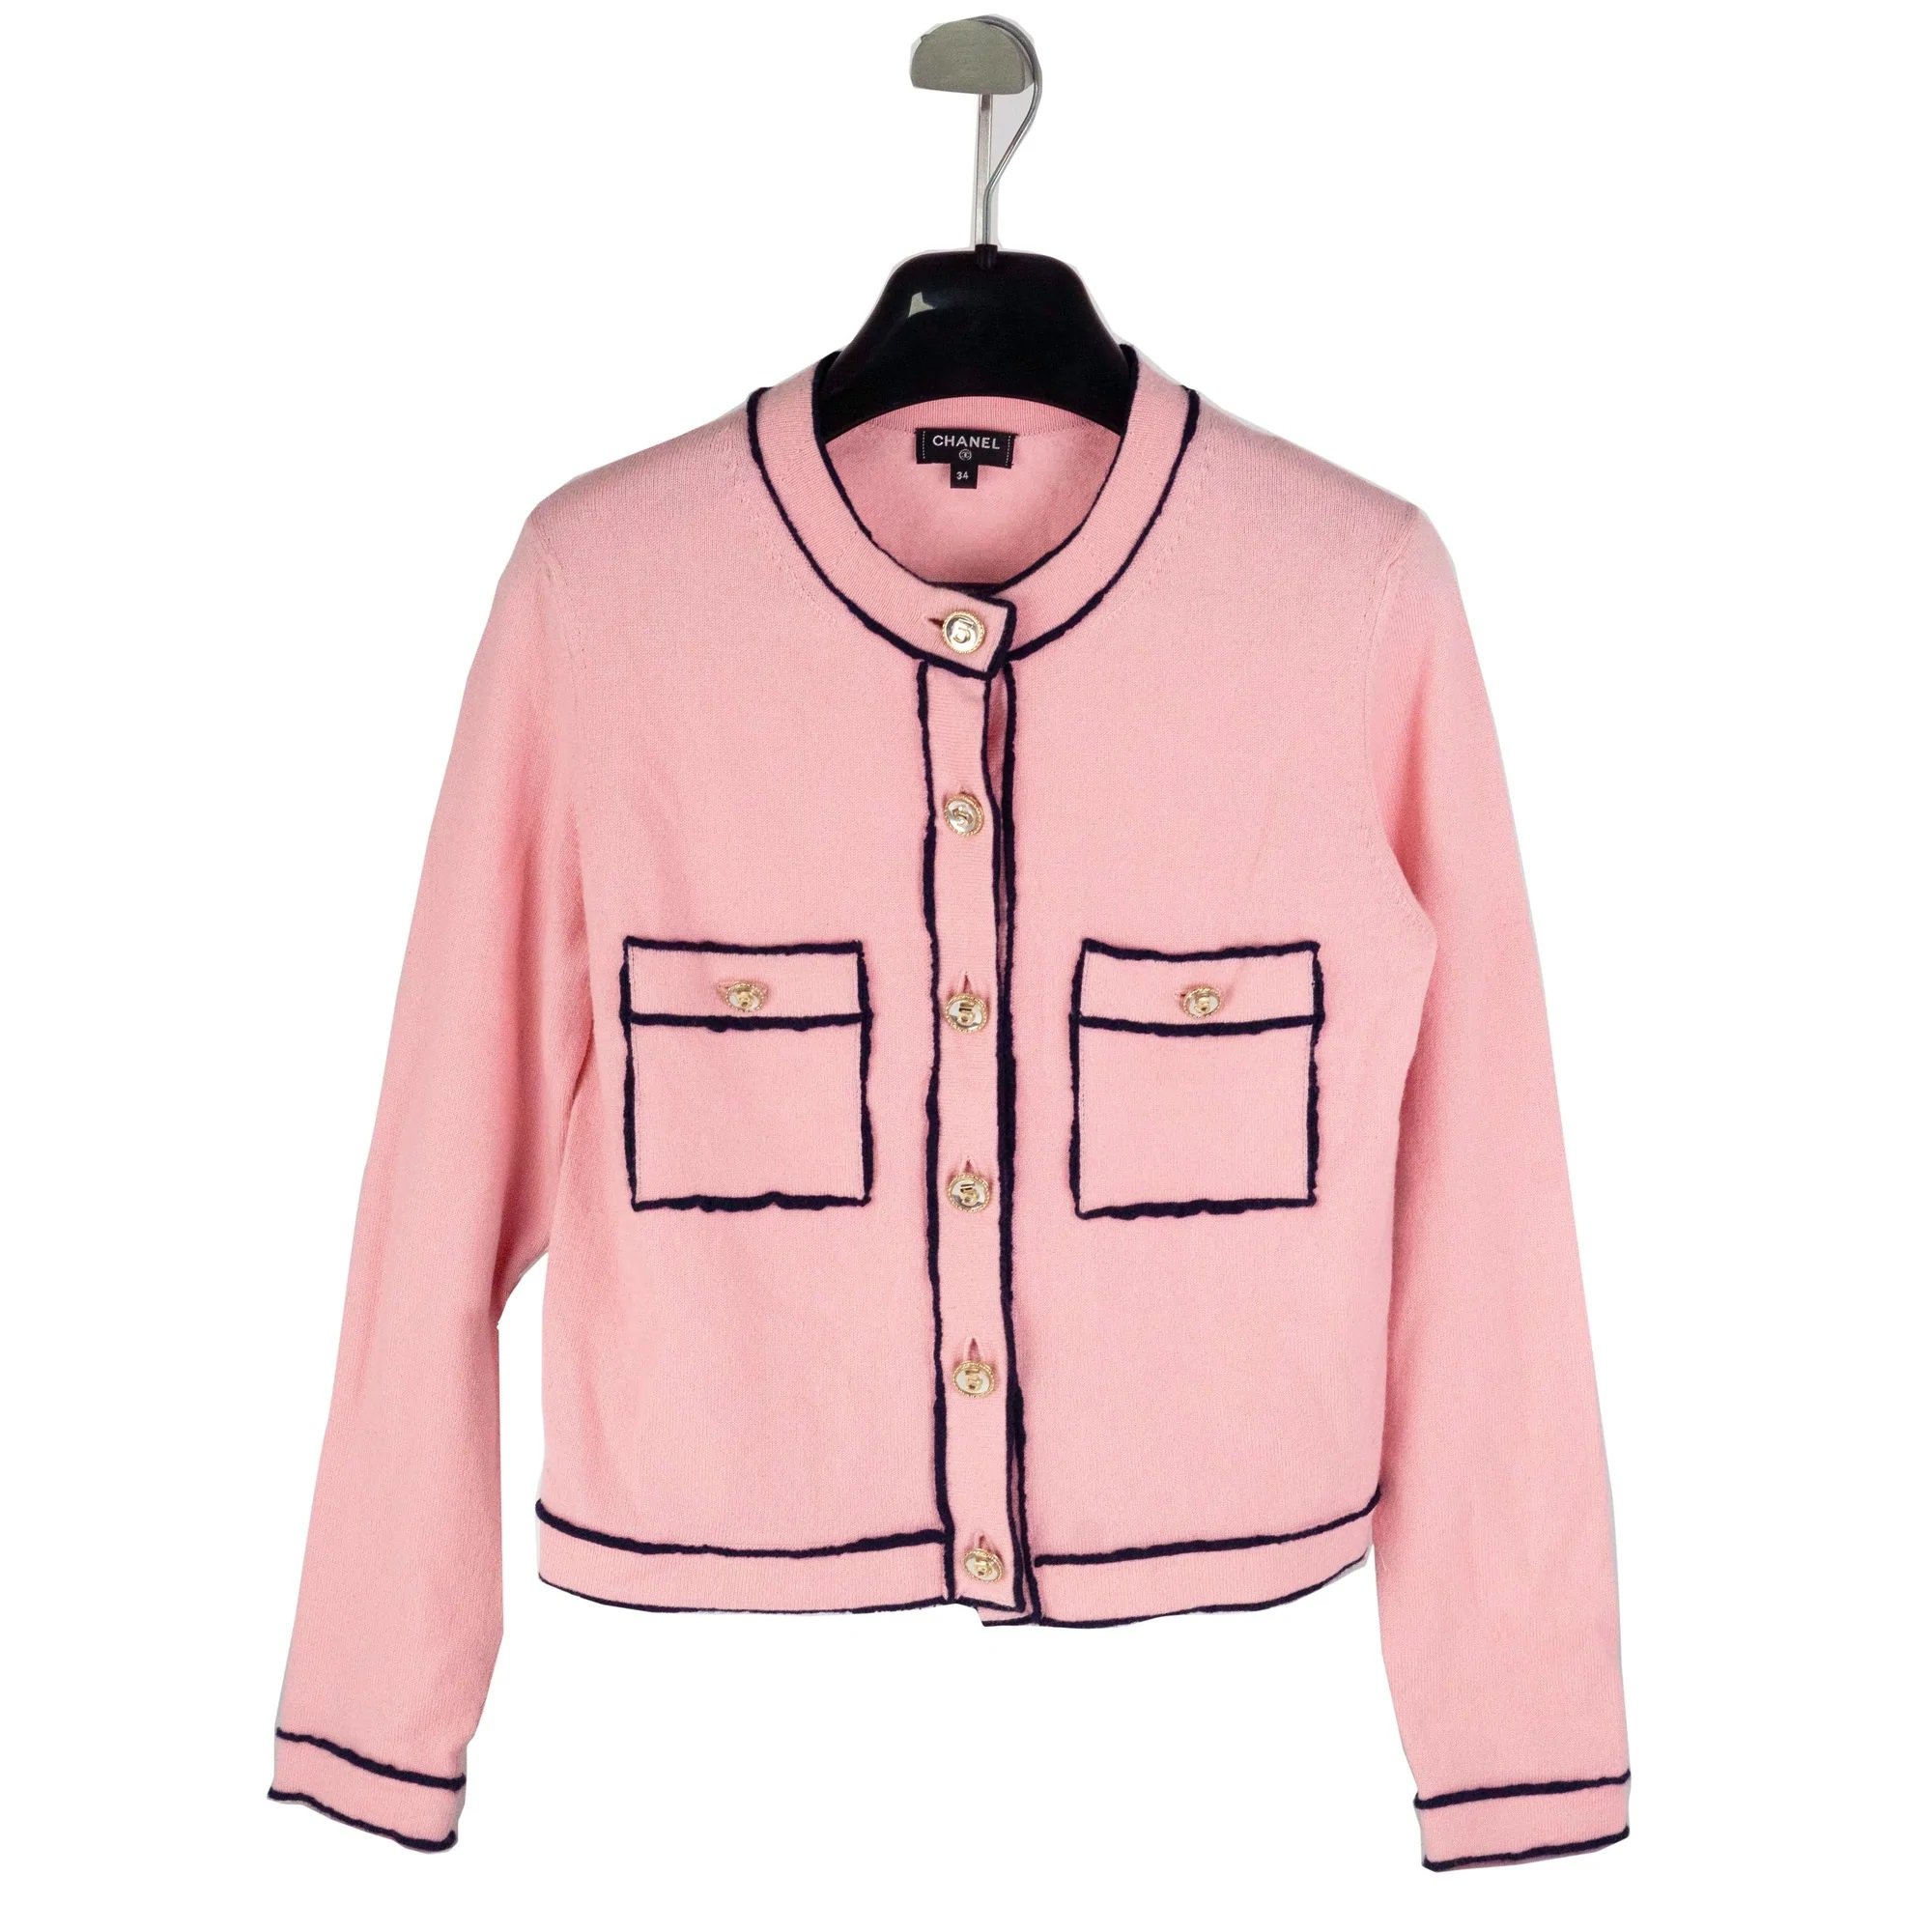 Chanel Cropped Cardigan with Contrast Trim.jpg